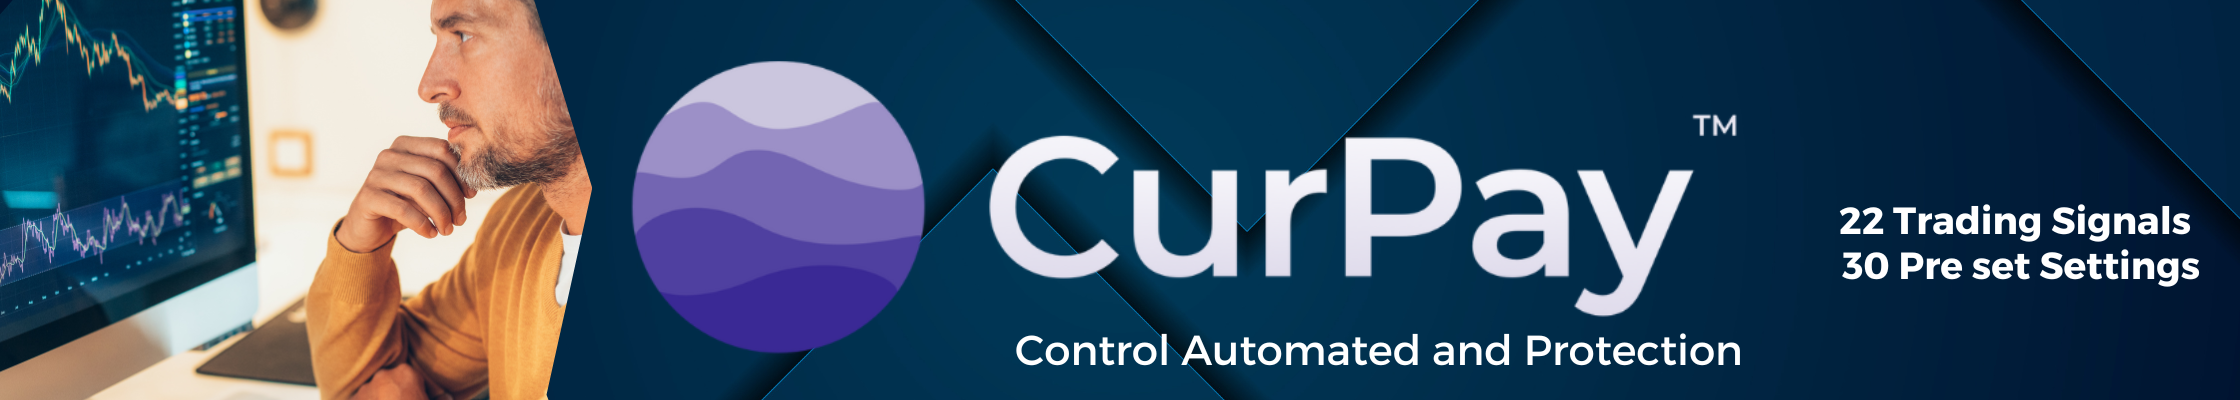 CurPay Automated Volatility Protection